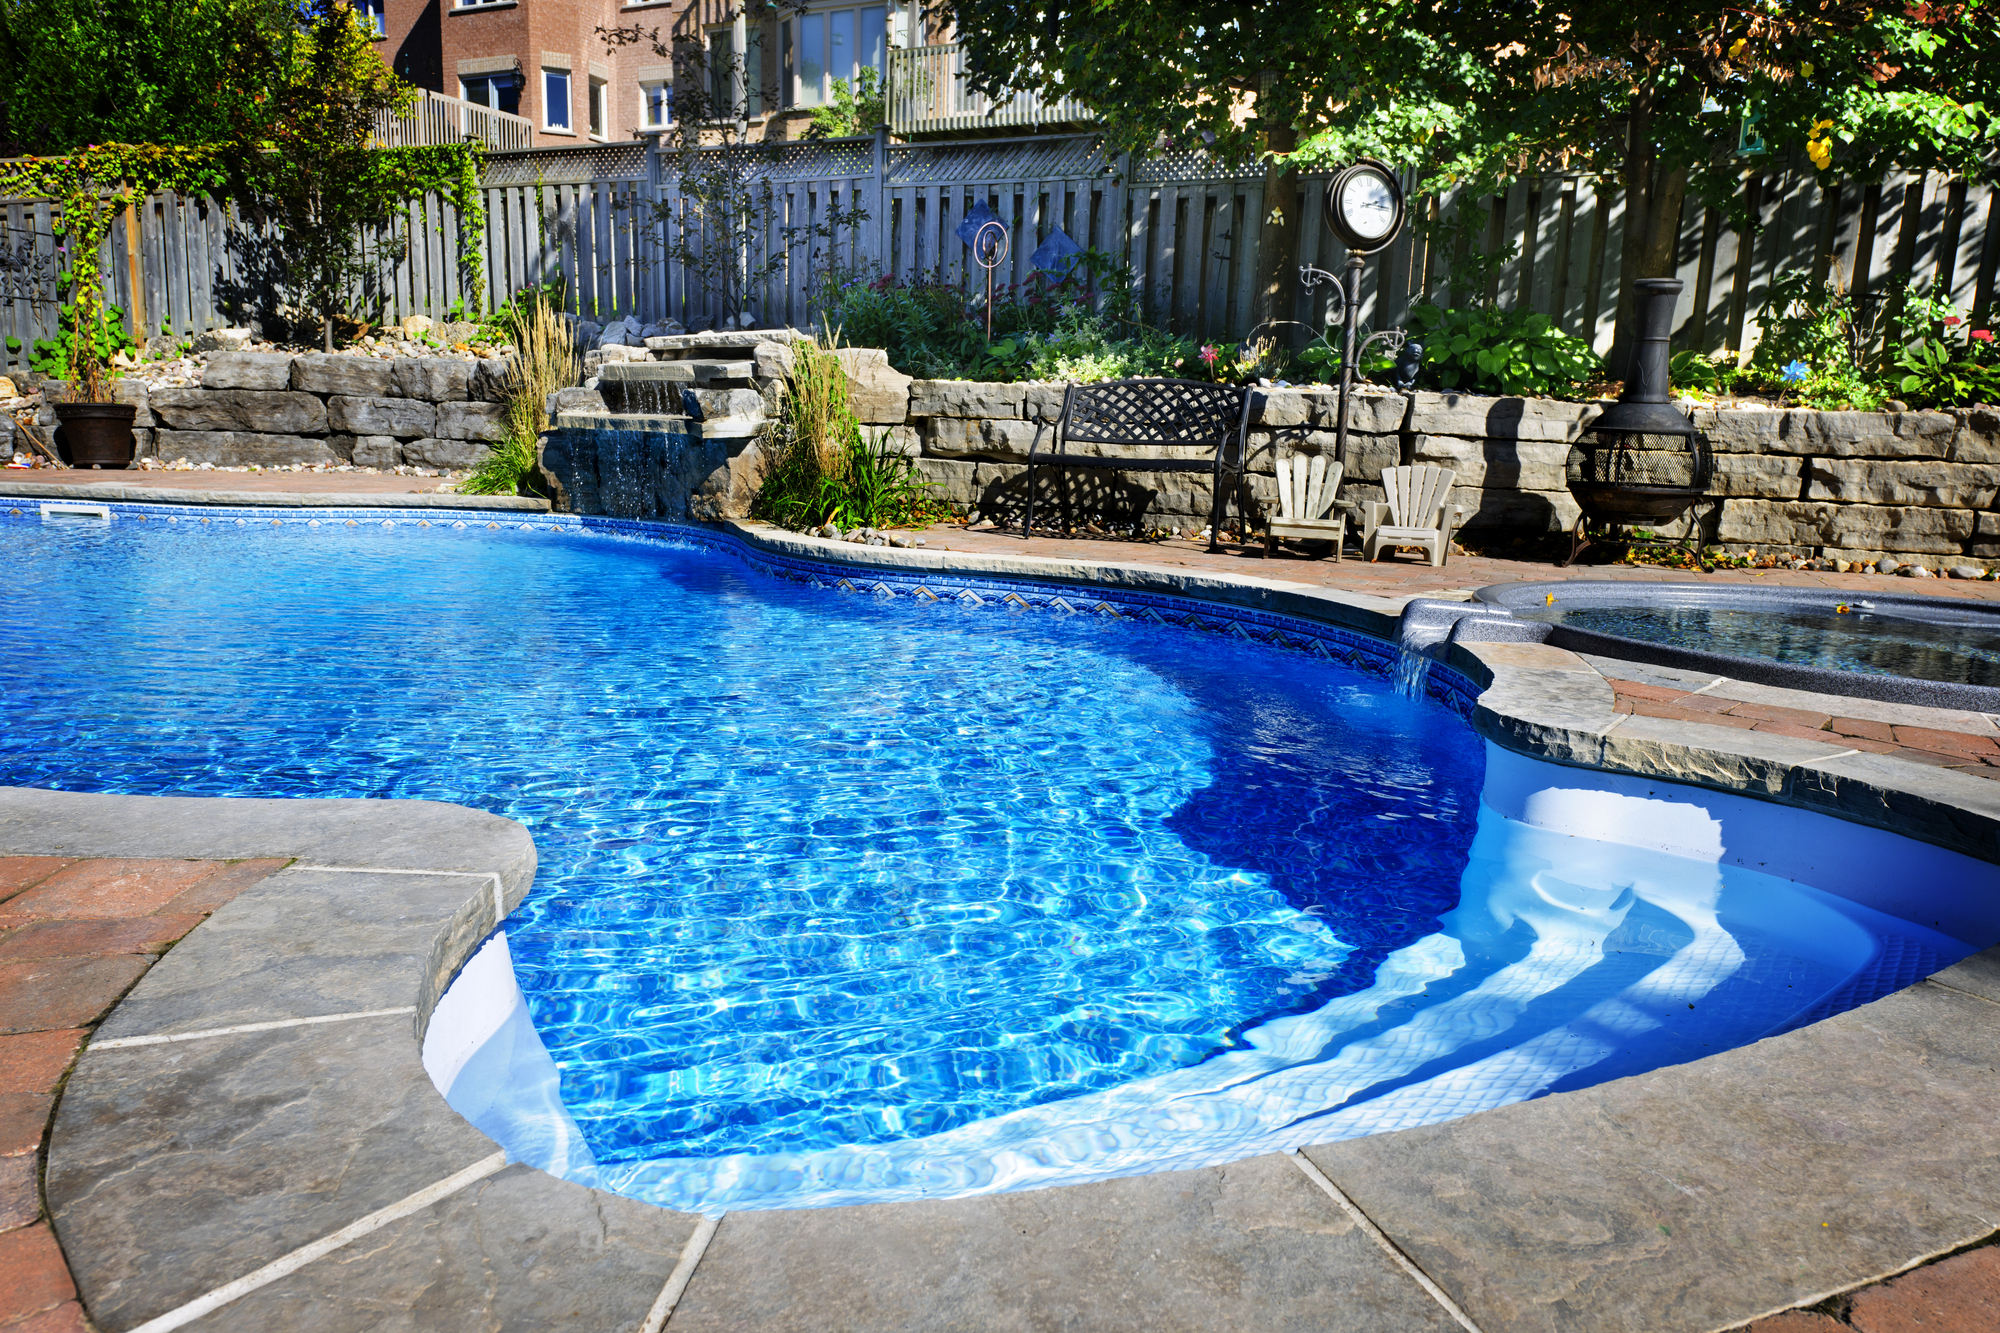 smart pool renovation options and add-ons upgrades for refreshing your backyard oasis without breaking the bank - Trust Executive Blue Pools Frisco for All Your Pool Needs